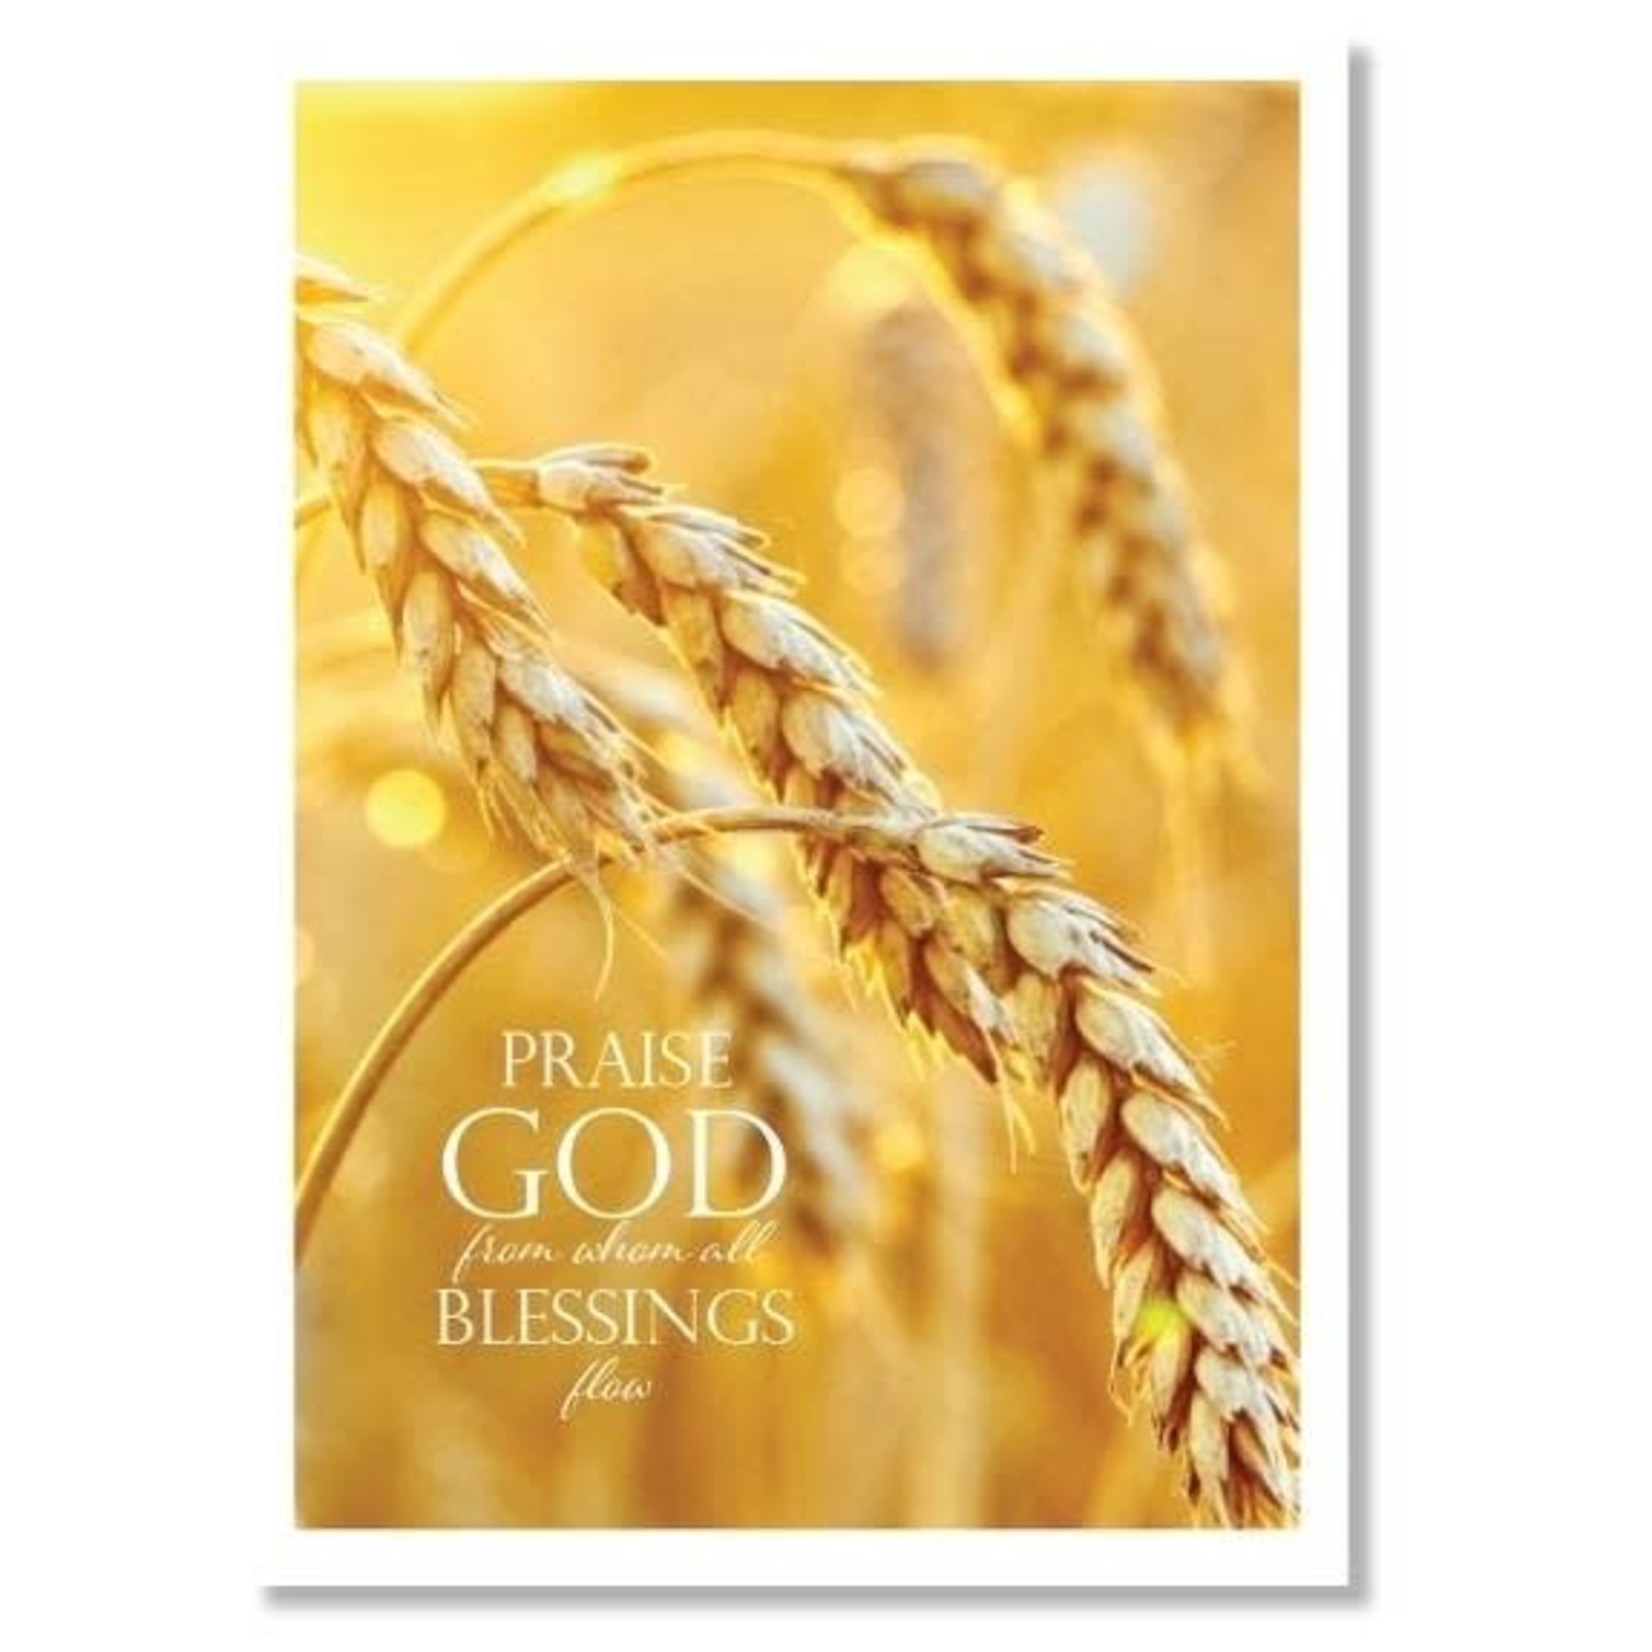 Hymns In My Heart Hymns In My Heart - 5x7" Greeting Card - Wedding Anniversary - Praise God From Whom All Blessings Flow